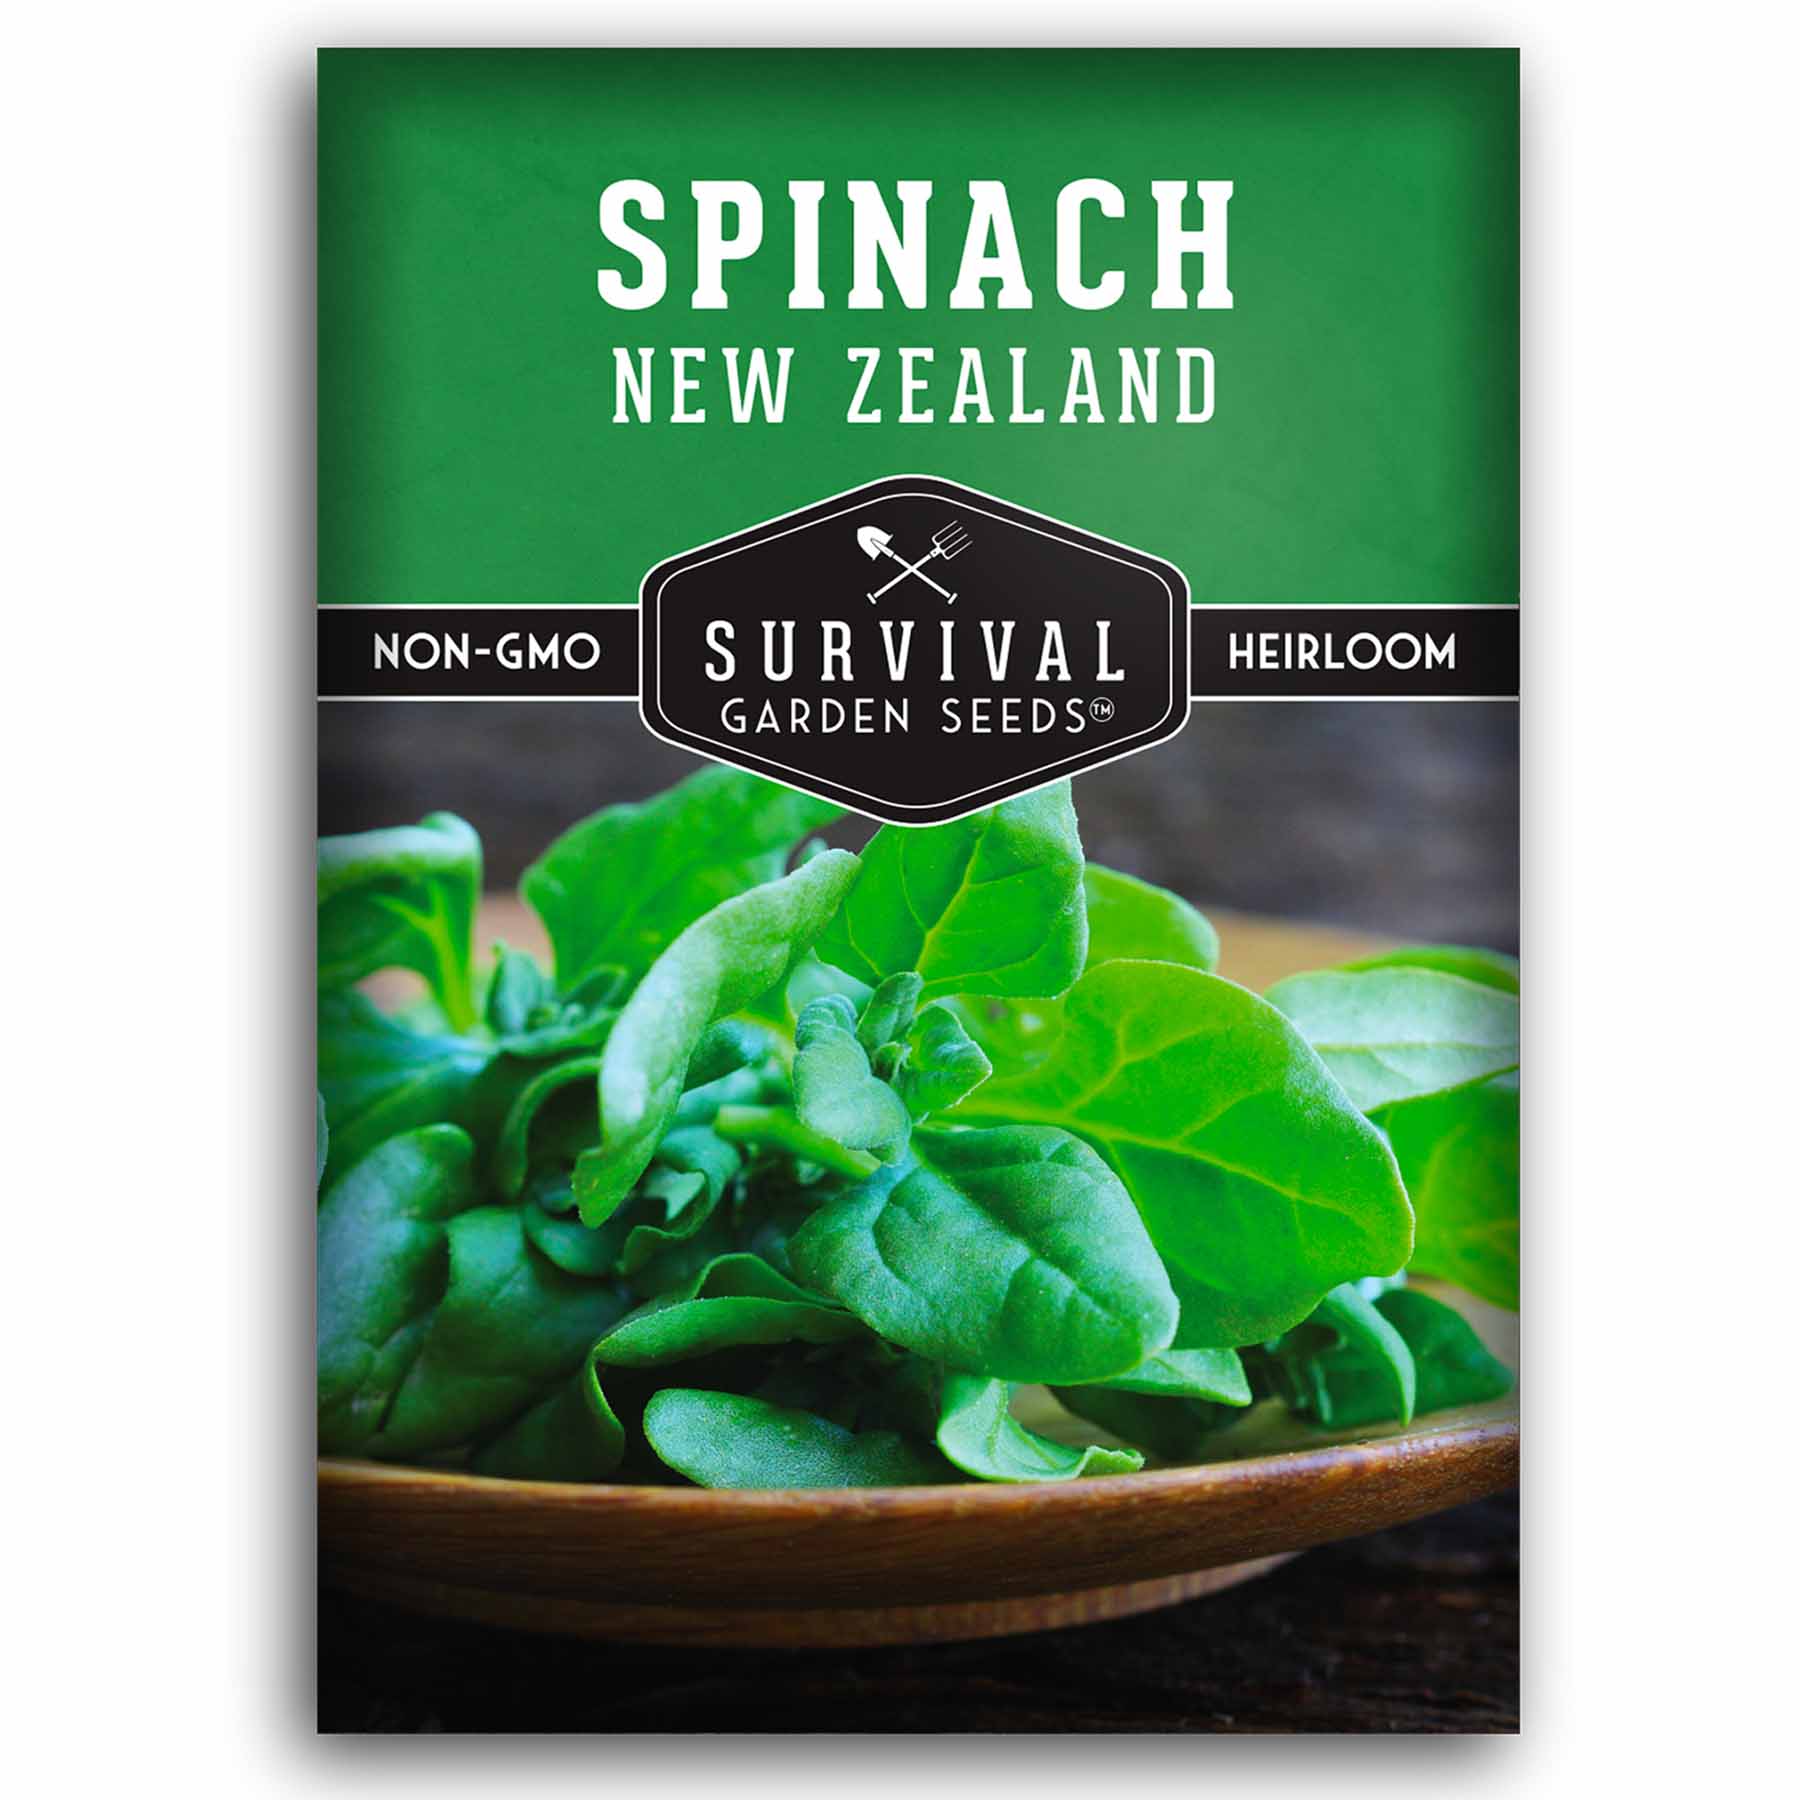 1 packet of New Zealand Spinach seeds